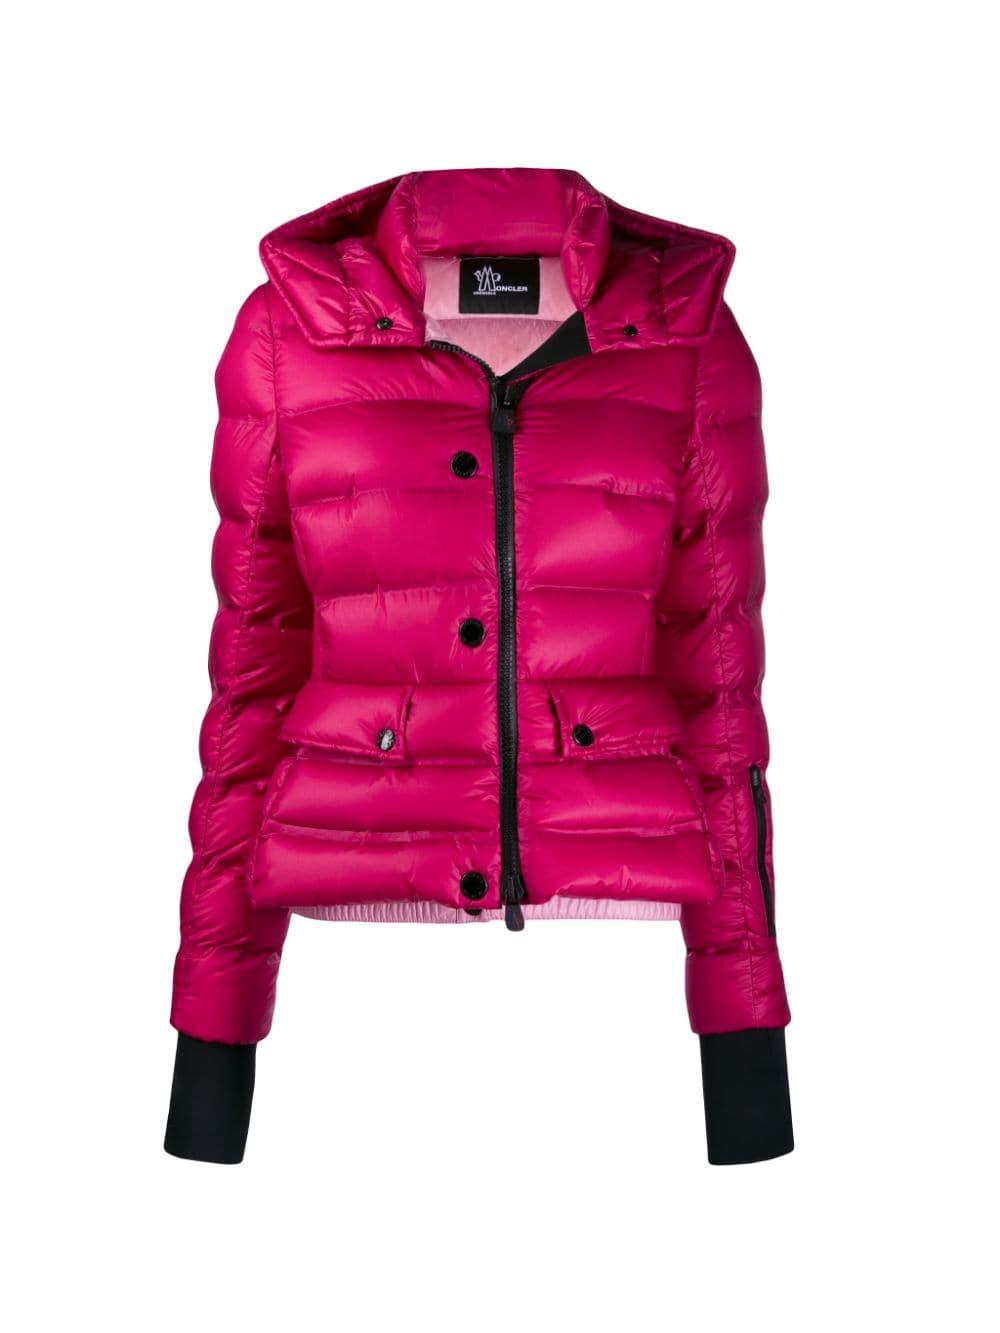 3 MONCLER GRENOBLE Synthetic 'armotech' Down Jacket in Pink - Lyst